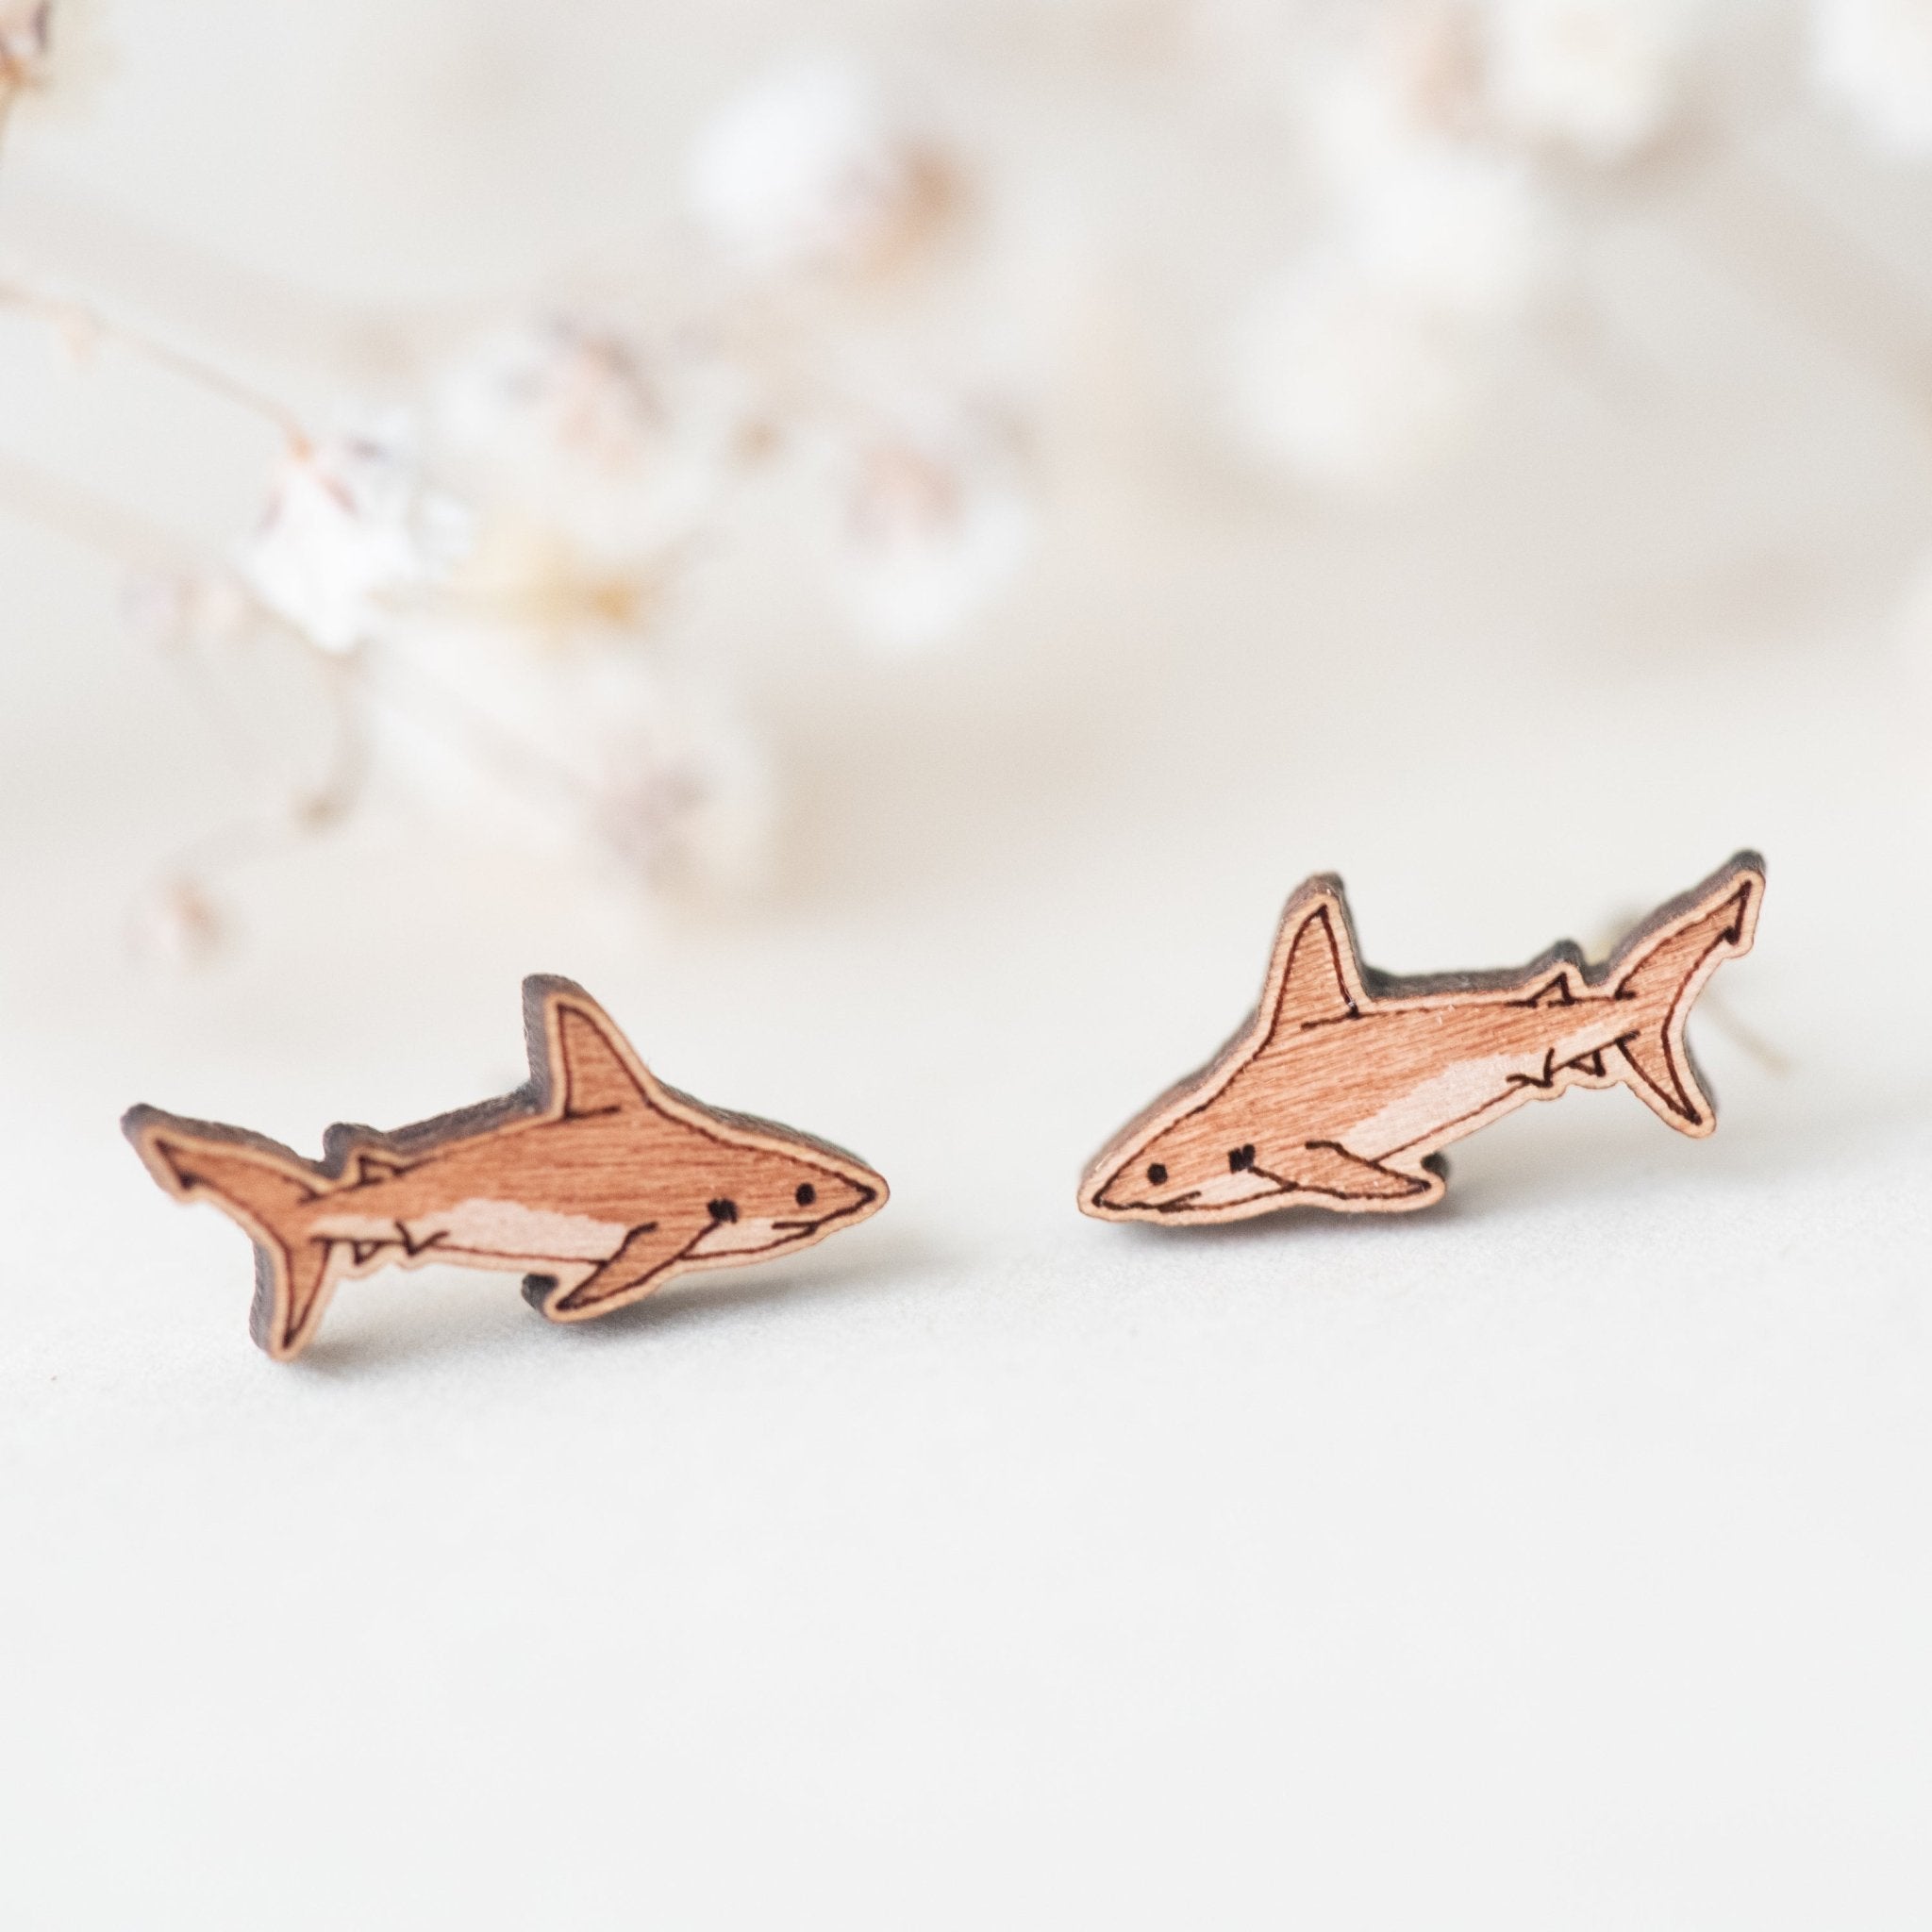 Thresher Shark Cherry Wood Stud Earrings - ES13022 - Robin Valley Official Store